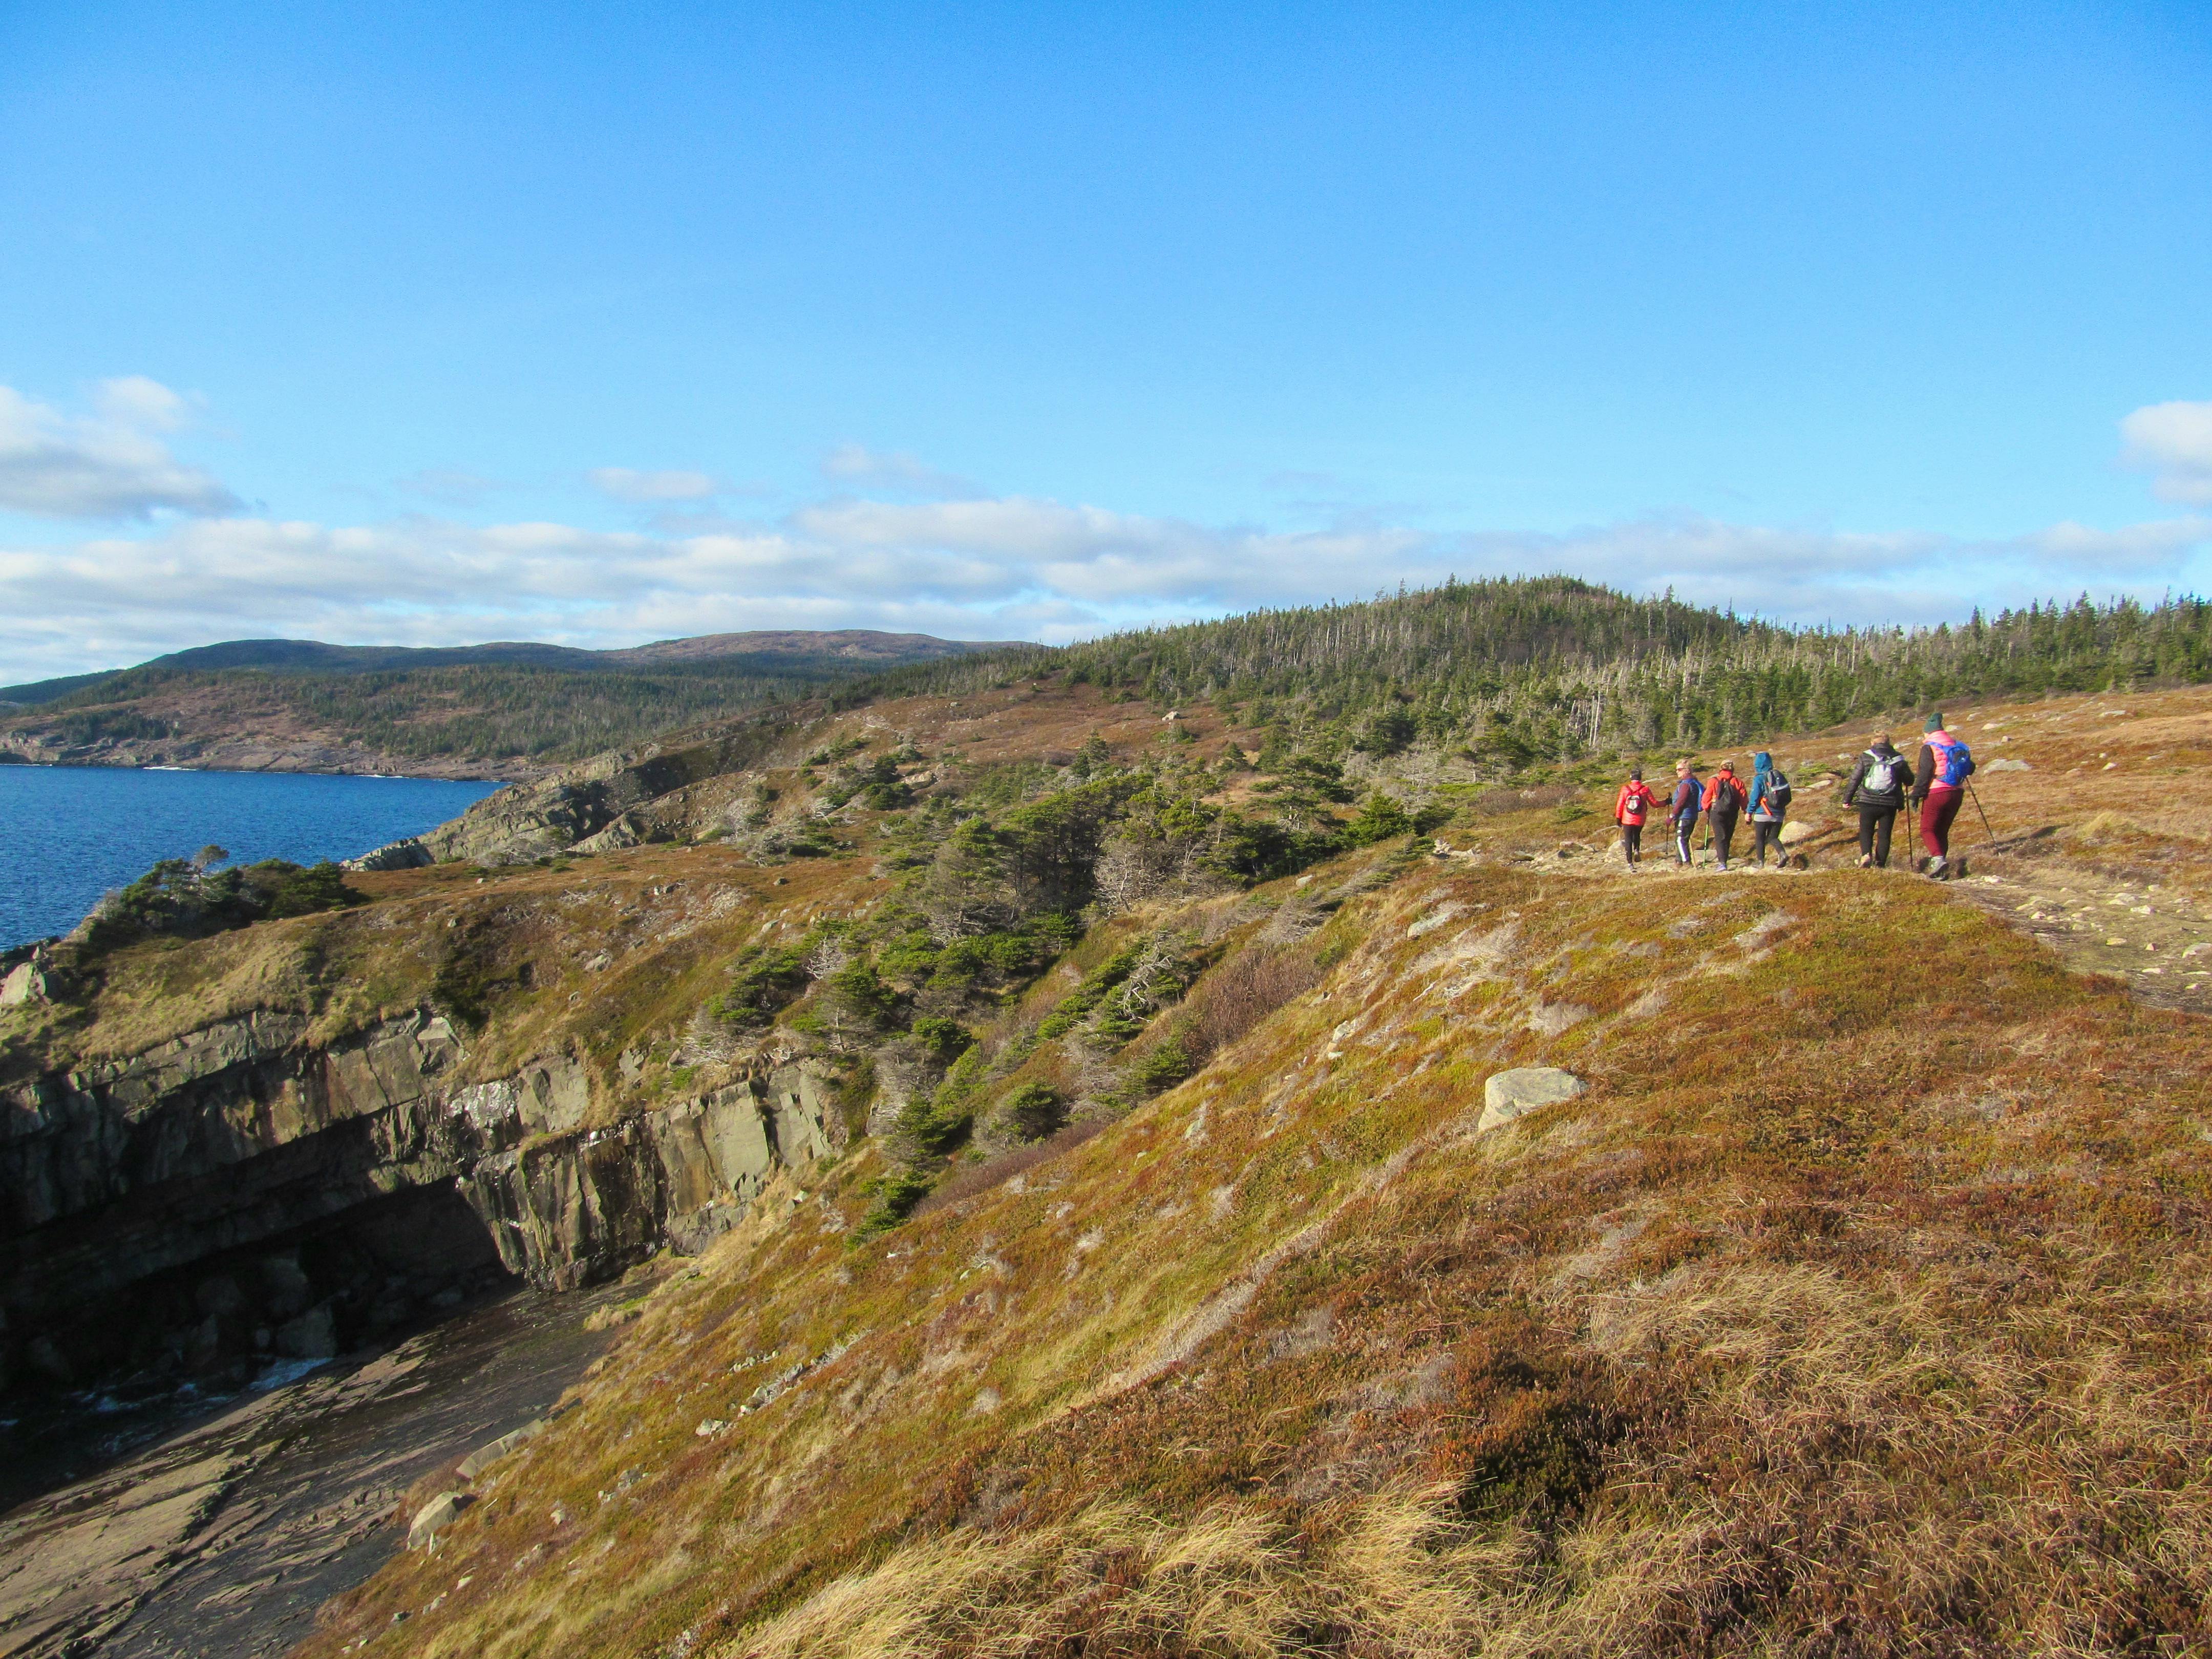 A beautiful spot for a hike! Jantje VanHouwelingen sent in this photo of “The Ferryland Ladies” hiking the East Coast Trail from Bay Bulls, N.L. towards the North Head Lighthouse near the end of November. Jantje said it was a day of “peace and sun,” which you can certainly tell it was just by looking at the photo. Here’s to more hiking, Jantje, and thanks for sharing!  

Submit your weather photos to be featured right here! Email your photos to weather@saltwire.com